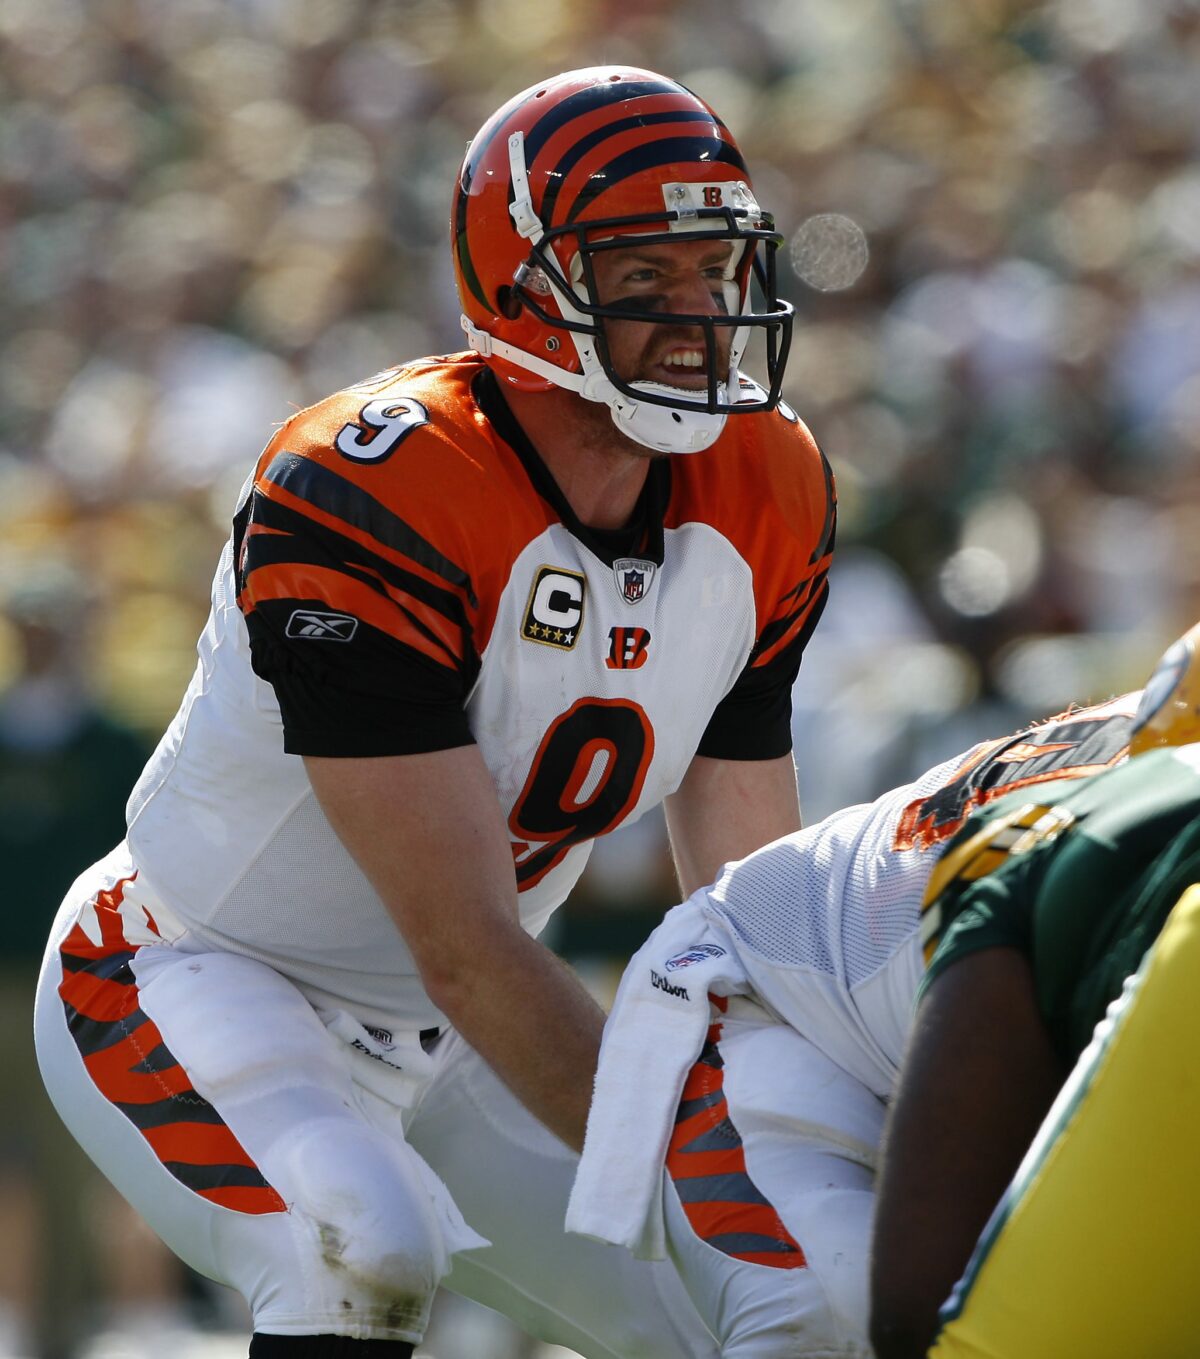 It’s Super Bowl Week, but Carson Palmer wants to talk about Joe Burrow’s future with the Bengals